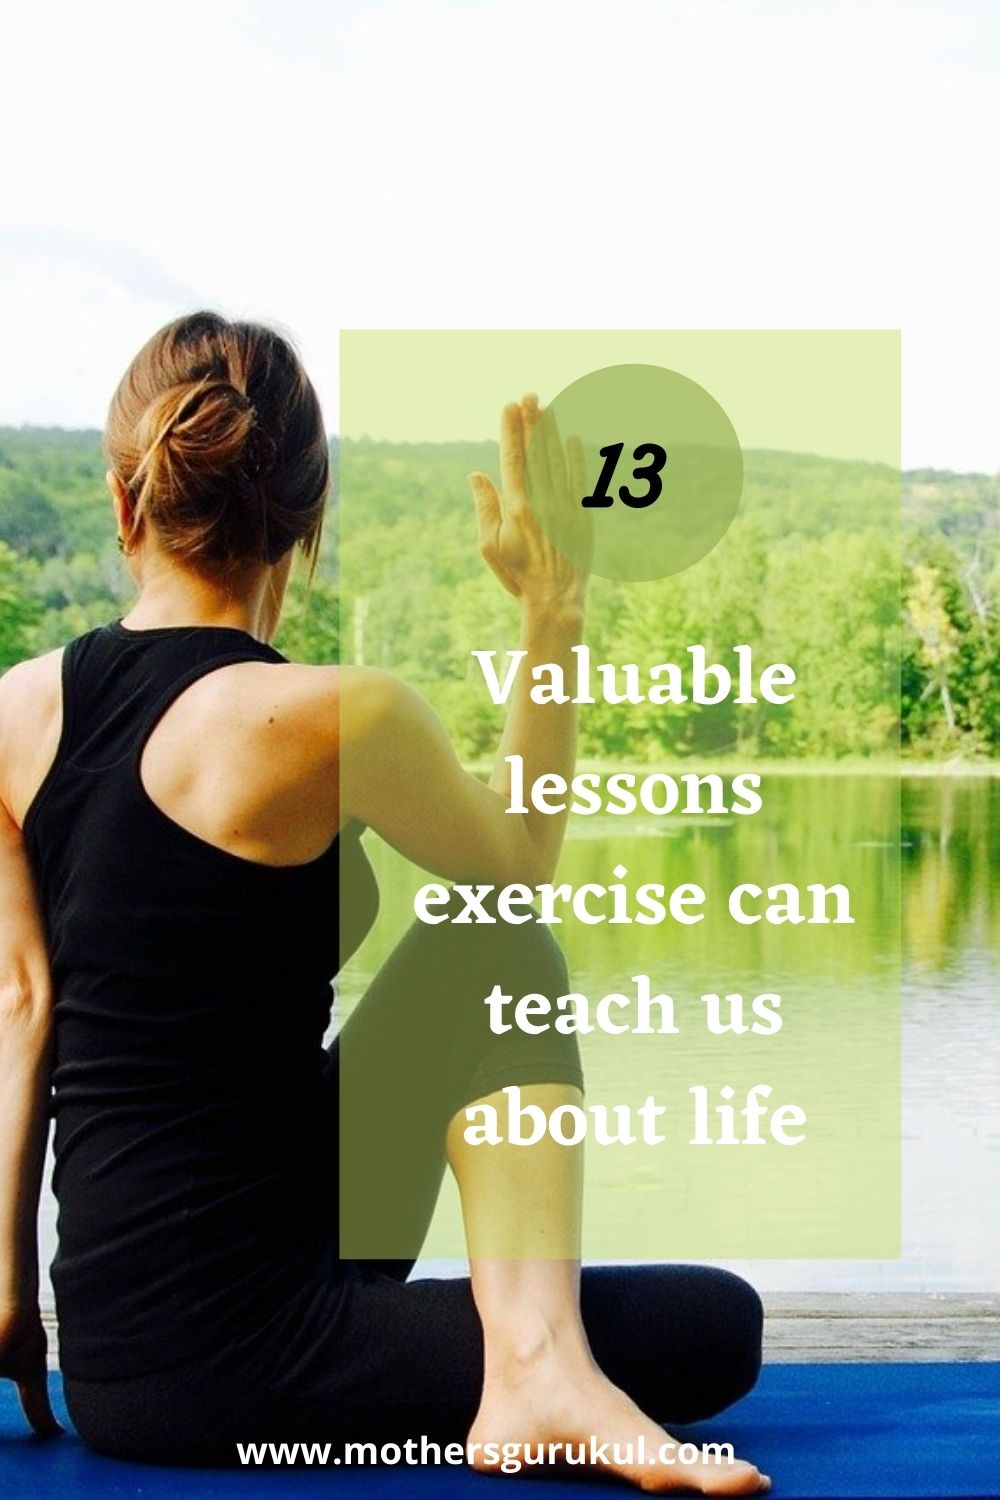 13 valuable lessons exercise can teach us about life.  